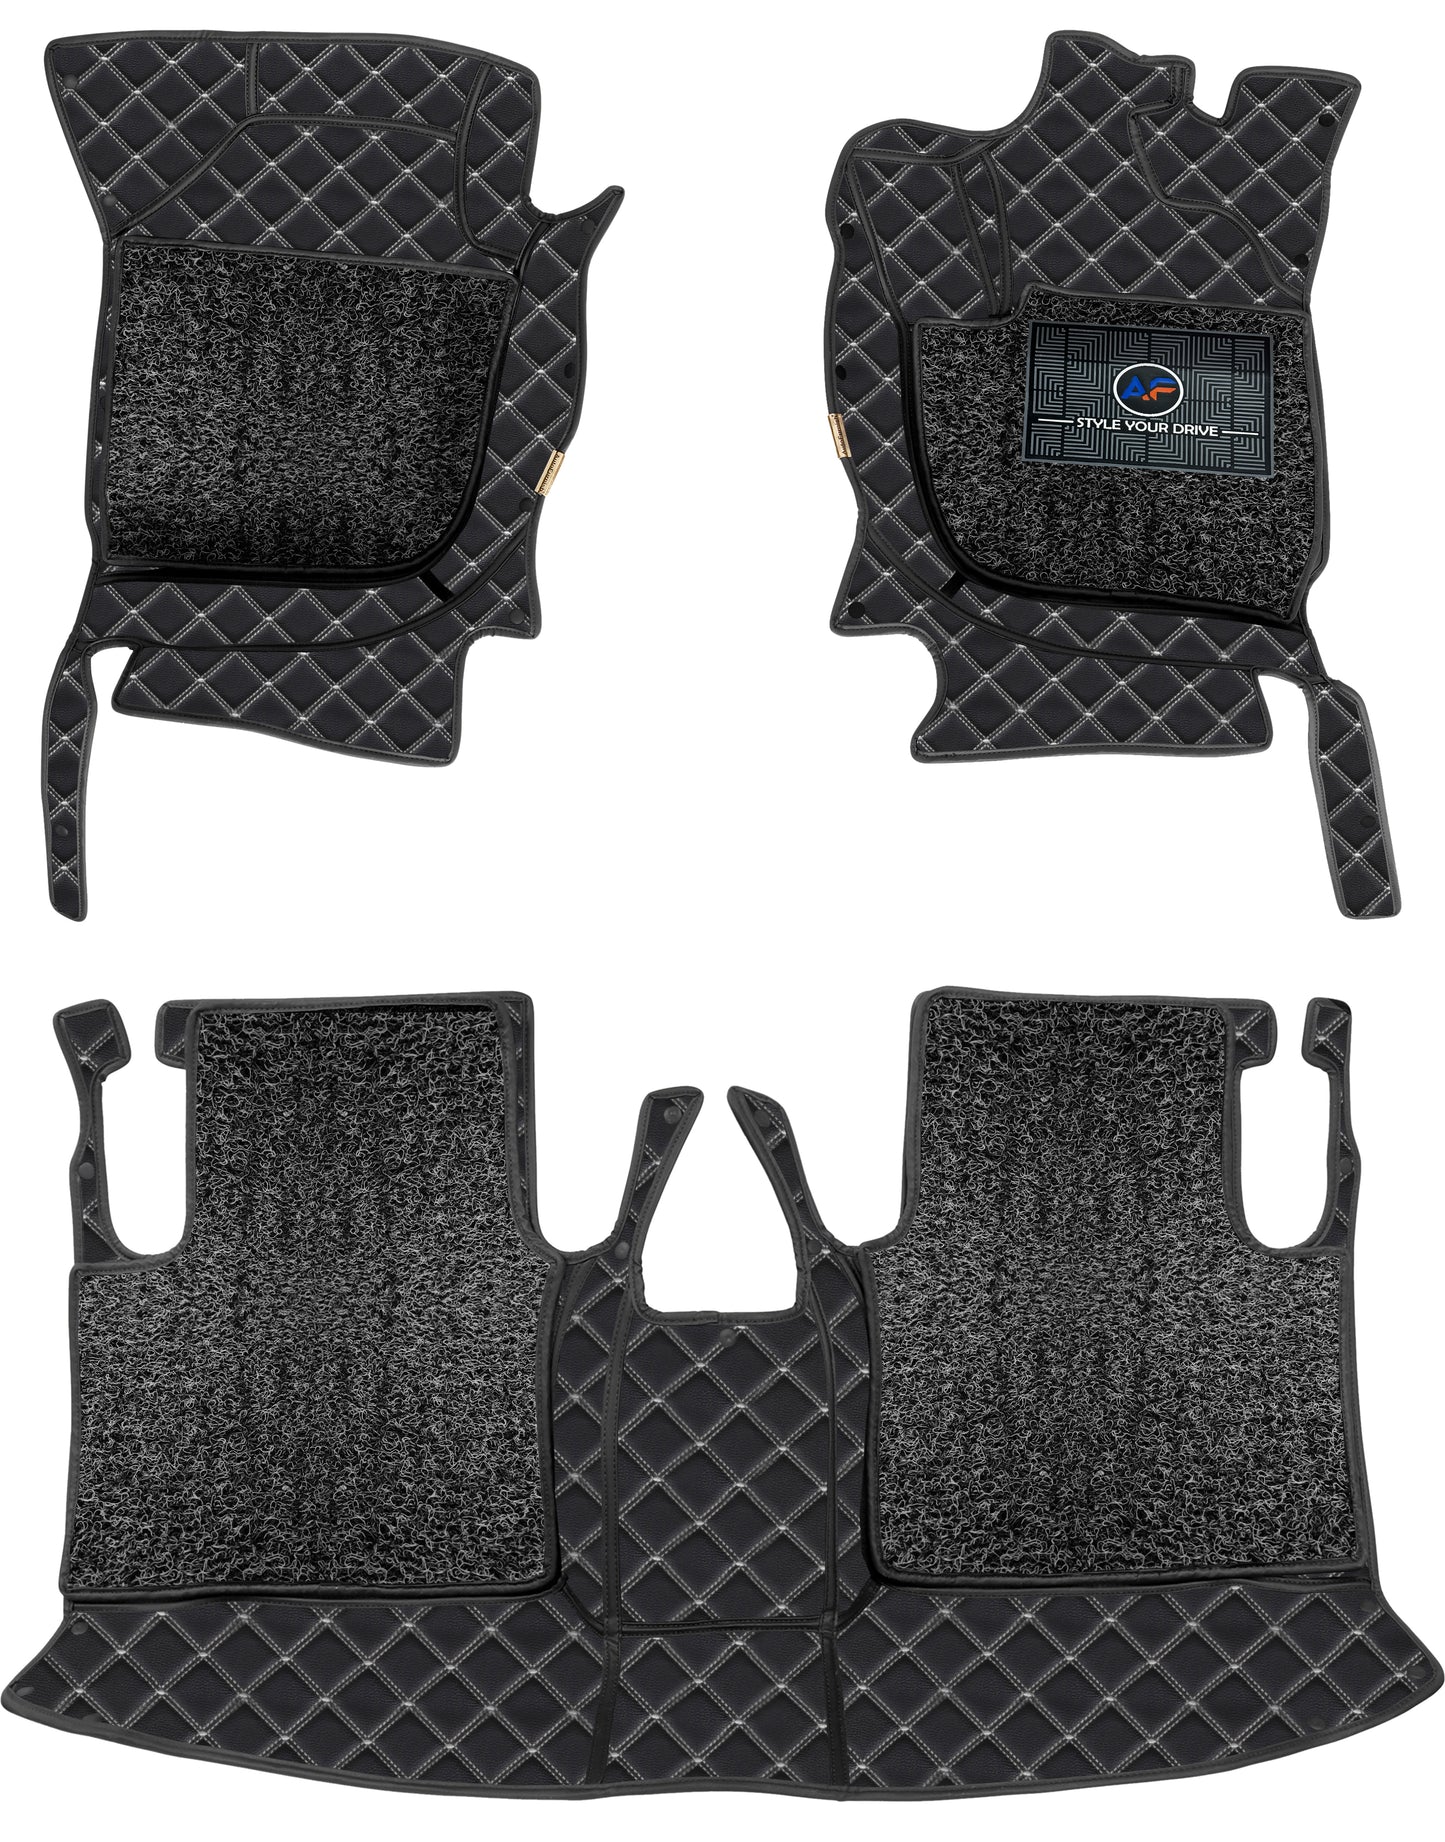 MG Hector 2019 7D Luxury Car Mat, All Weather Proof, Anti-Skid, 100% Waterproof & Odorless with Unique Diamond Fish Design (24mm Luxury PU Leather, 2 Rows)